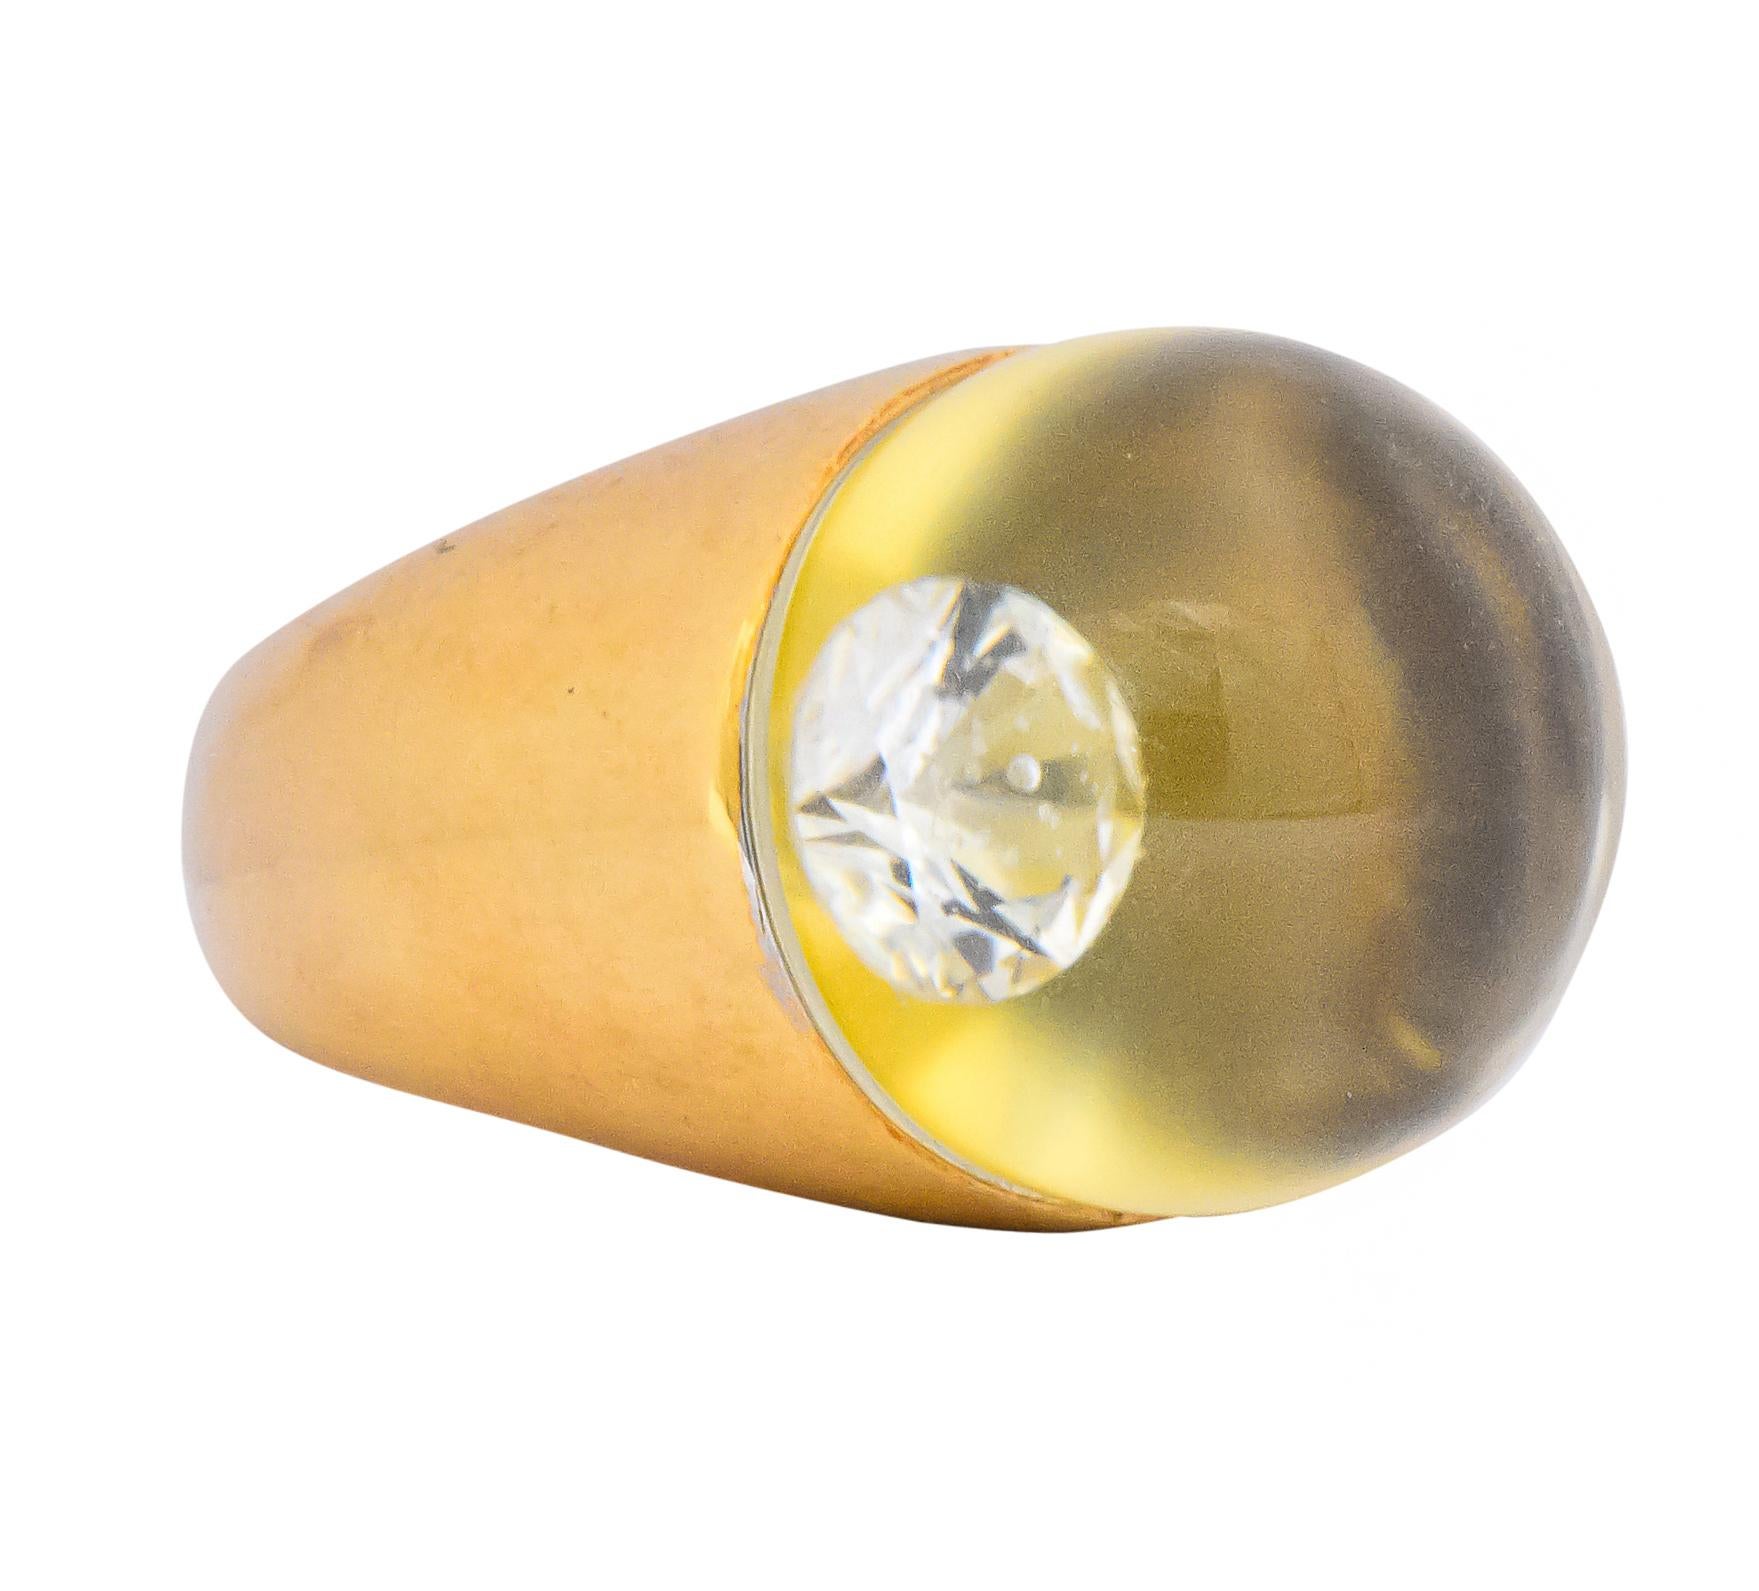 Featuring a rock crystal sphere measuring approximately 16.0 mm atop a round brilliant cut diamond

Nestled in a high polished gold formed setting

The crystal ball magnifies the diamond providing an illusion of a much bigger diamond

Fully singed